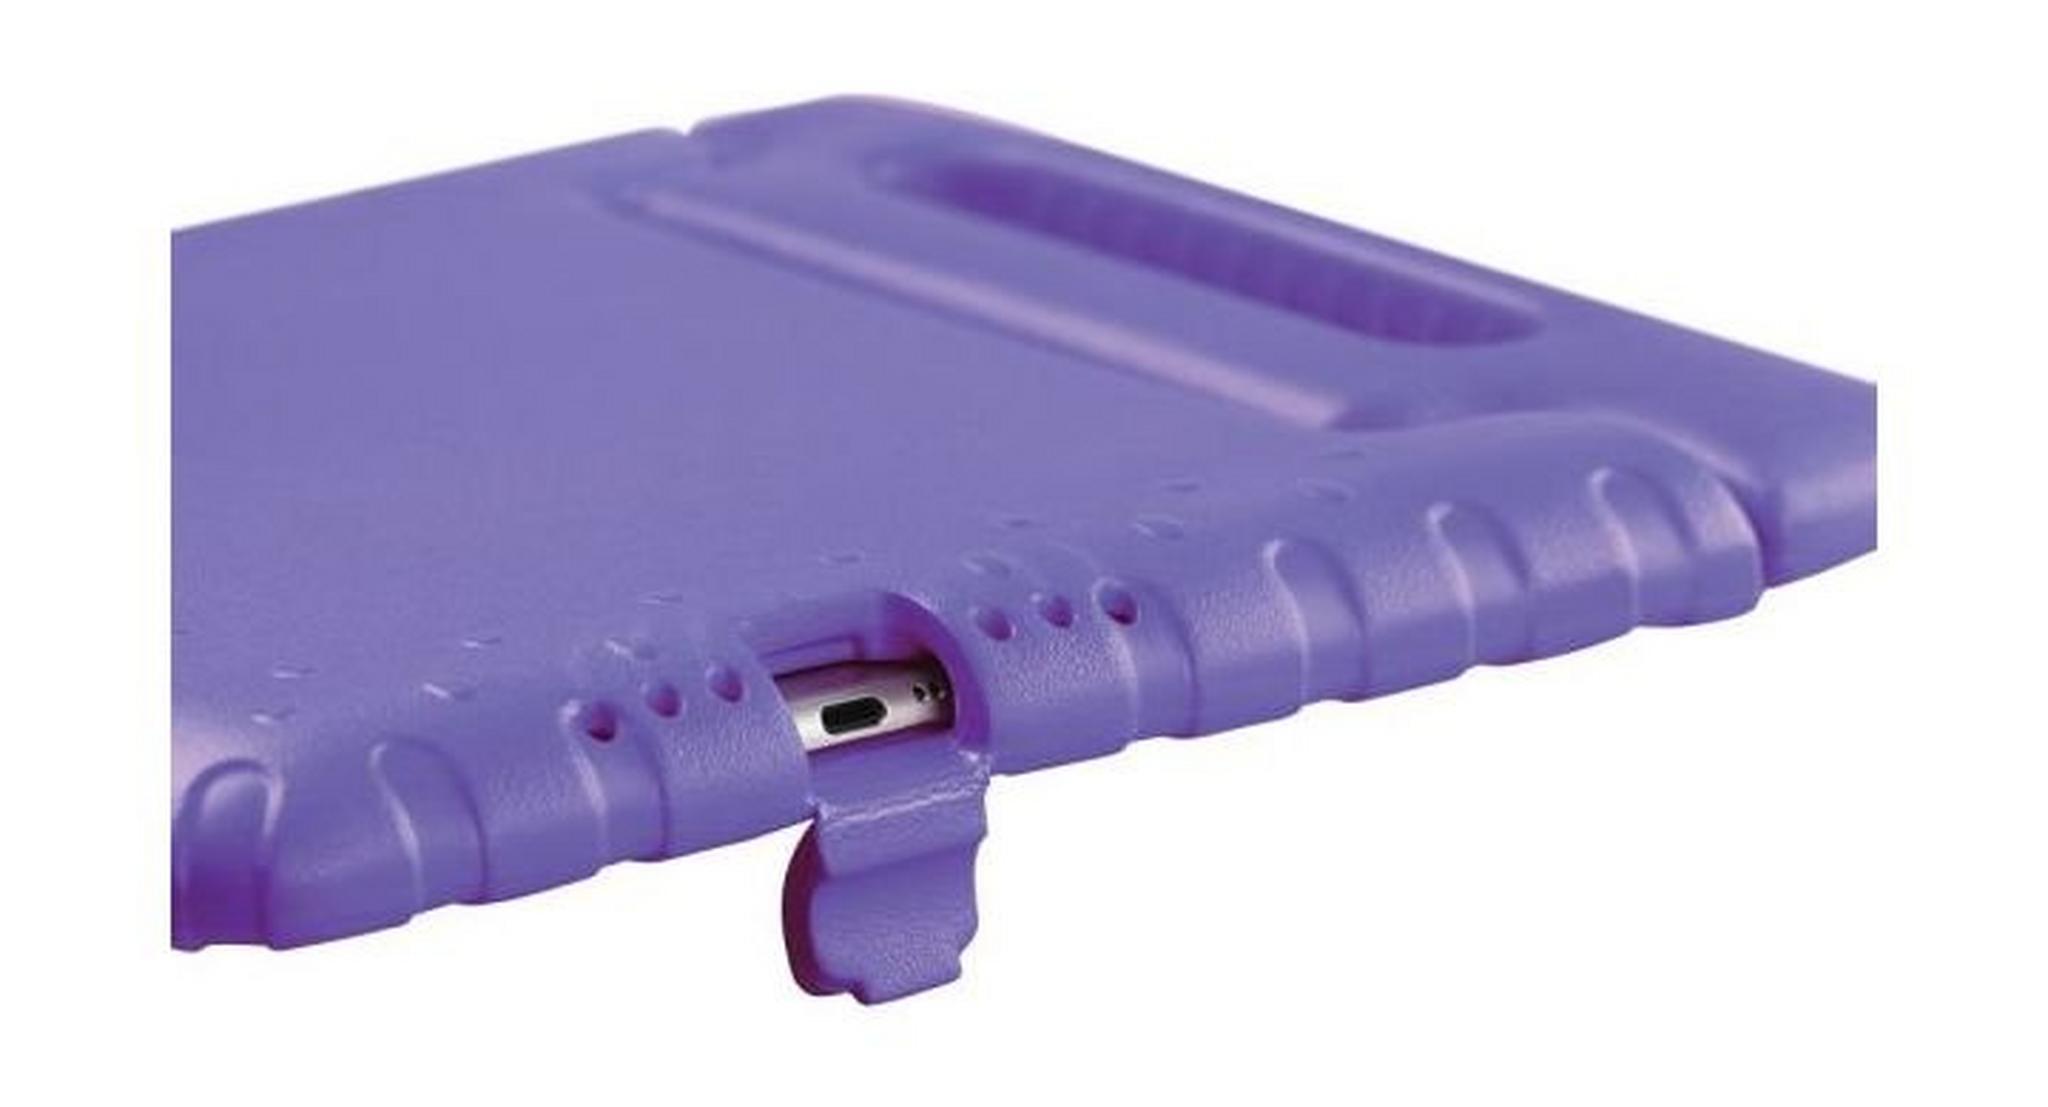 Promate Bamby Premium Shock Proof Kiddie Case For iPad Air 2 - Purple